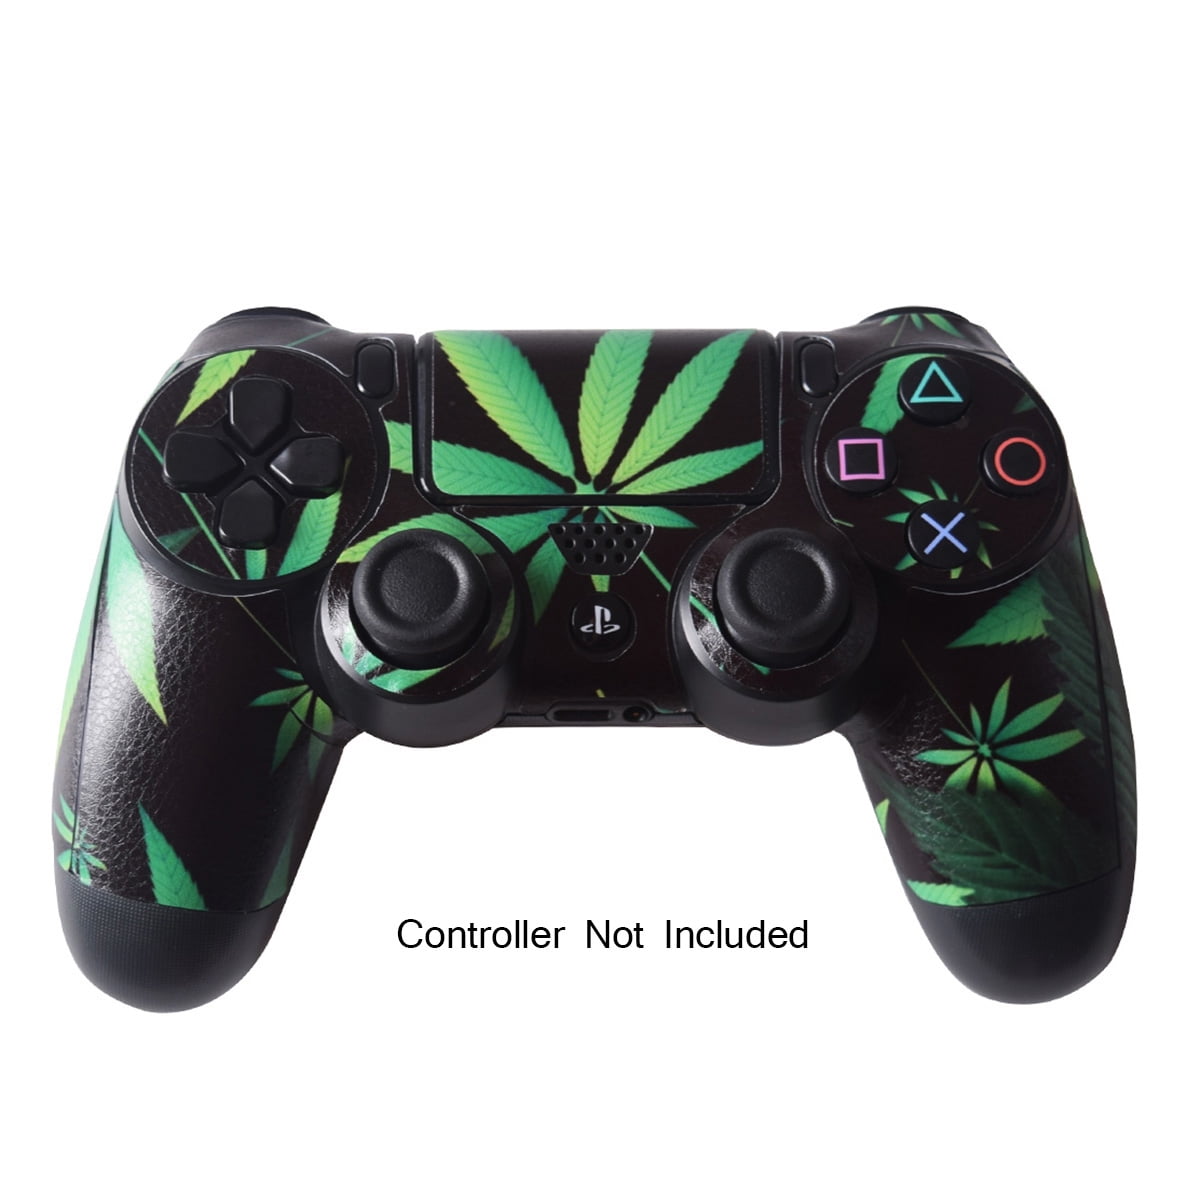 Renovering panel Jurassic Park Skin for PS4/PS4 SLIM/PS4 PRO Controller Vinyl Playstation 4 Gamepad Decal  Wireless DualShock 4 Remote Decal Weeds Black for Christmas Gift -  Walmart.com